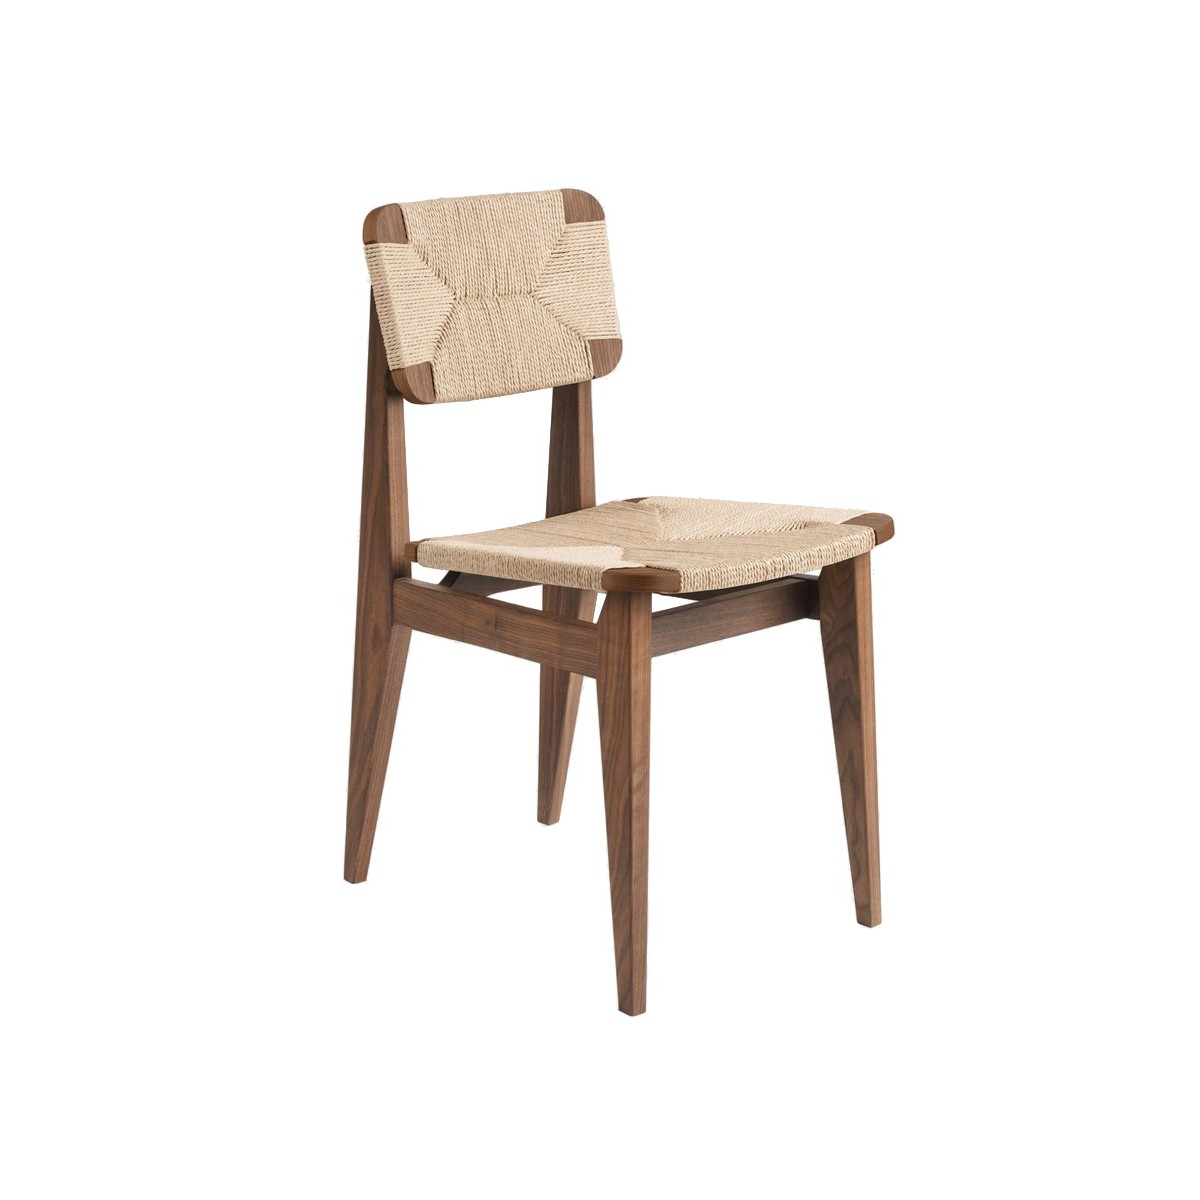 Oiled American Walnut, papercord seat & back – C-Chair